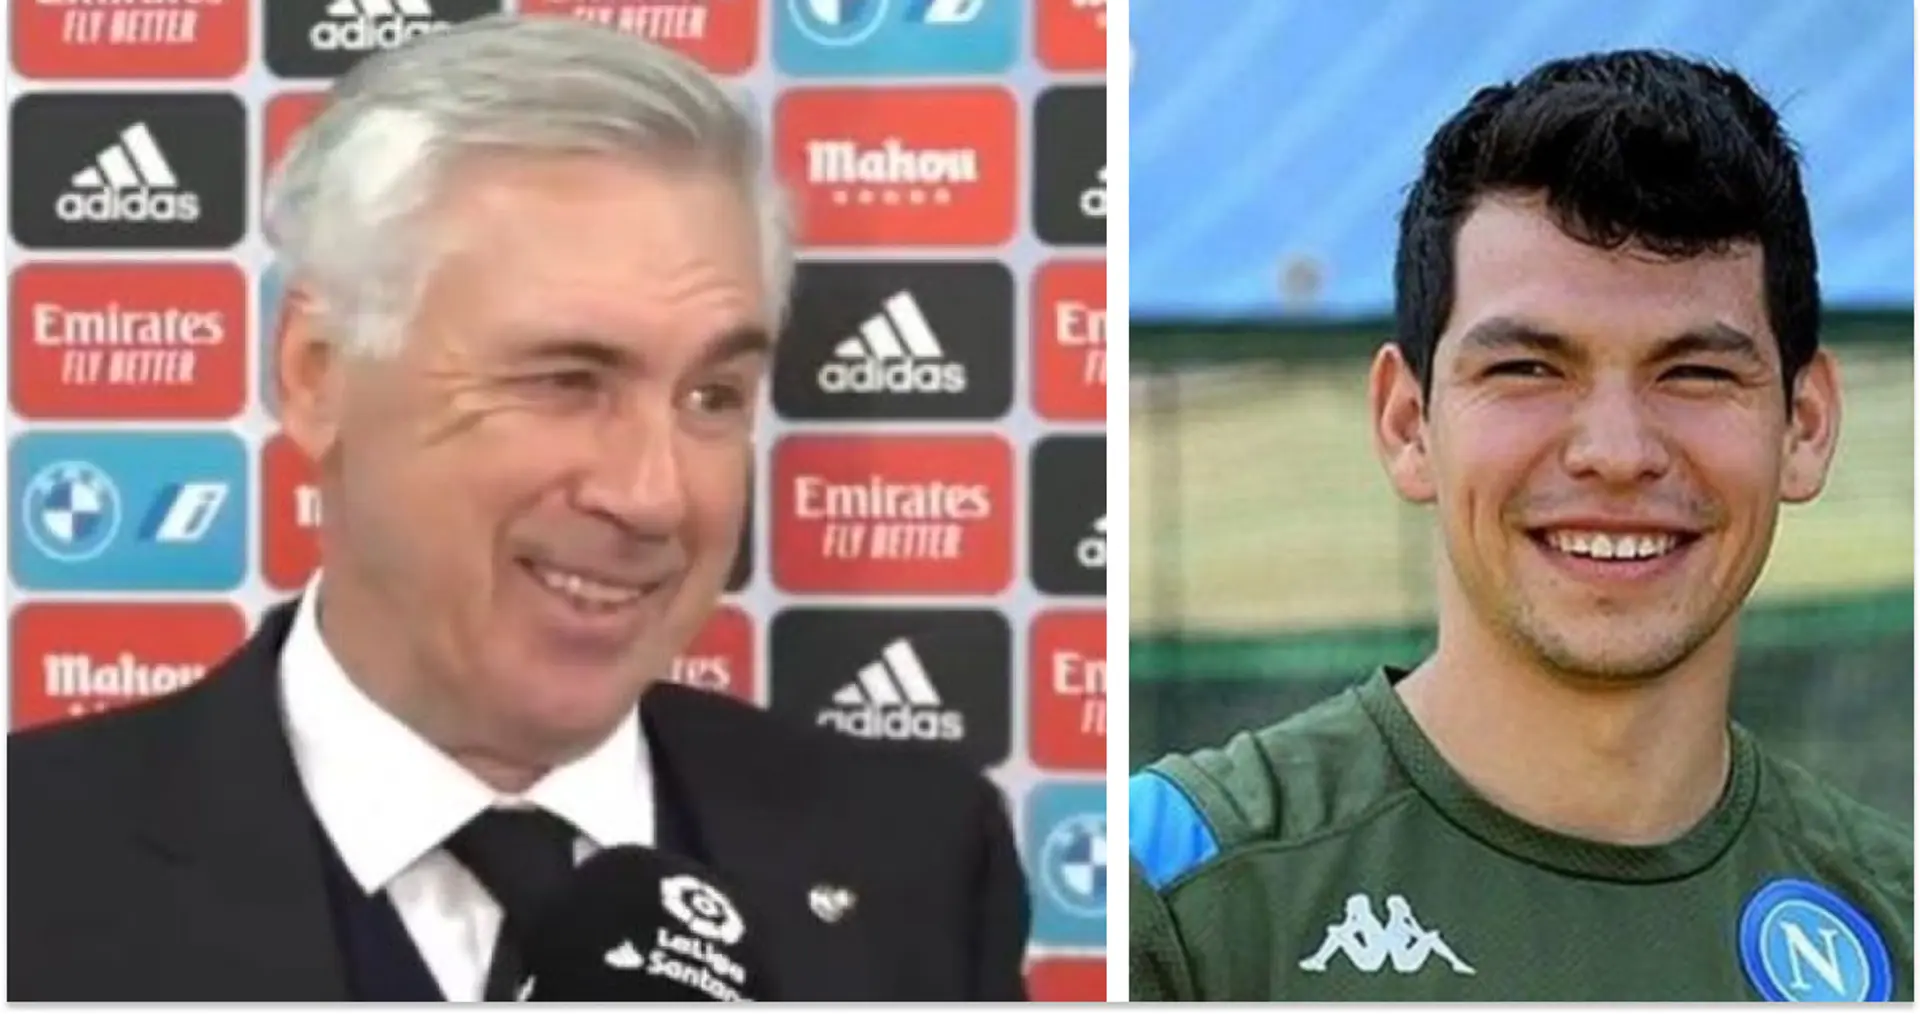 "That’s just the way he is': most wholesome story about Ancelotti you'll hear today